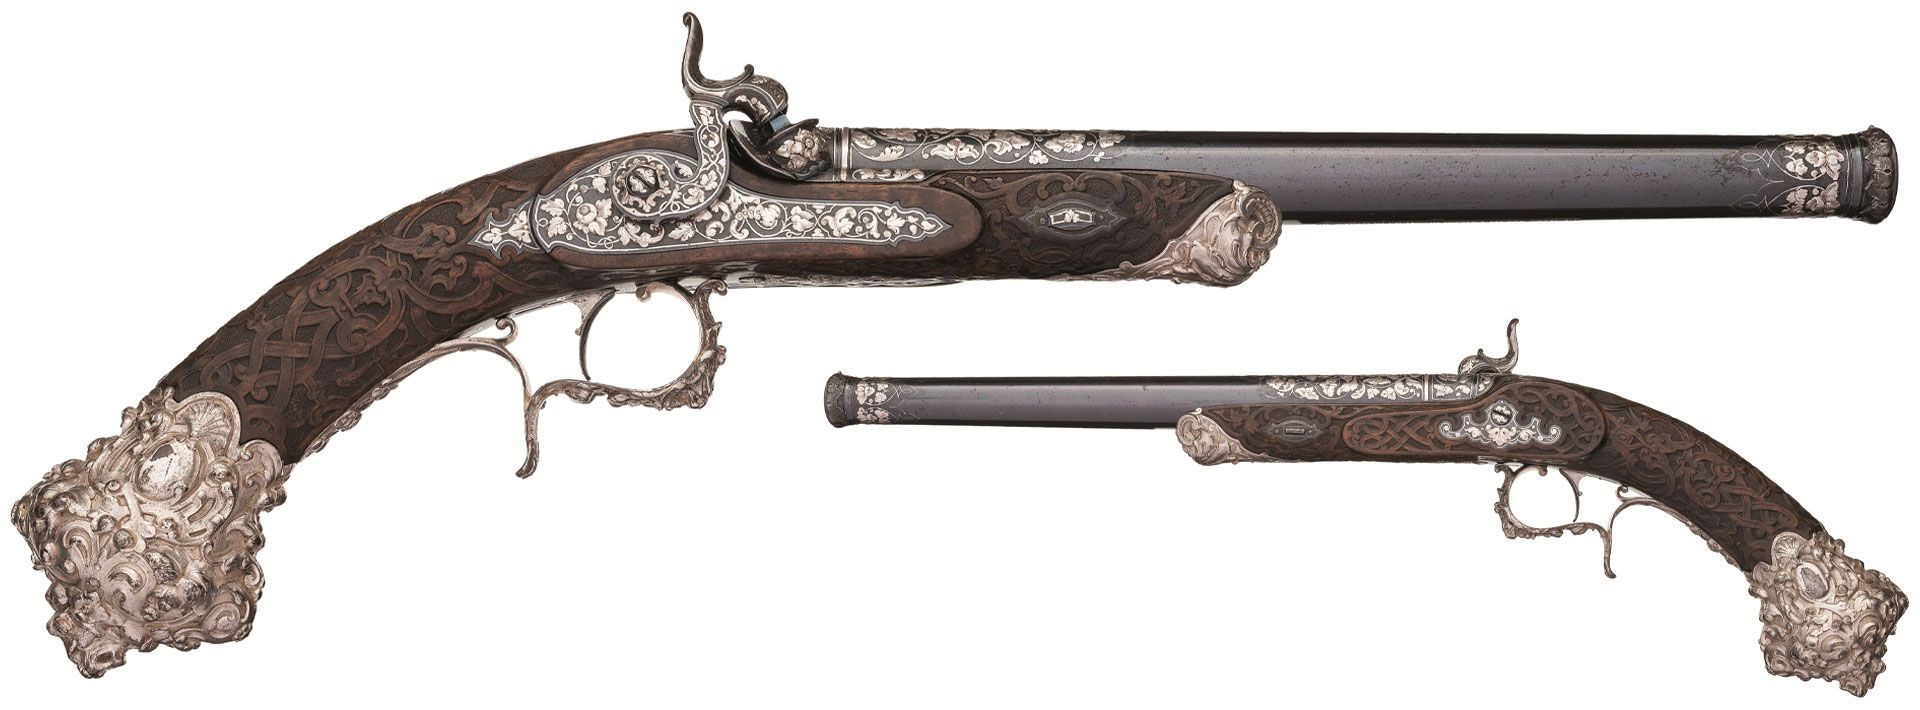 Pair-of-Gastinne-Renette-Pistols-from-the-Exposition-Universelle